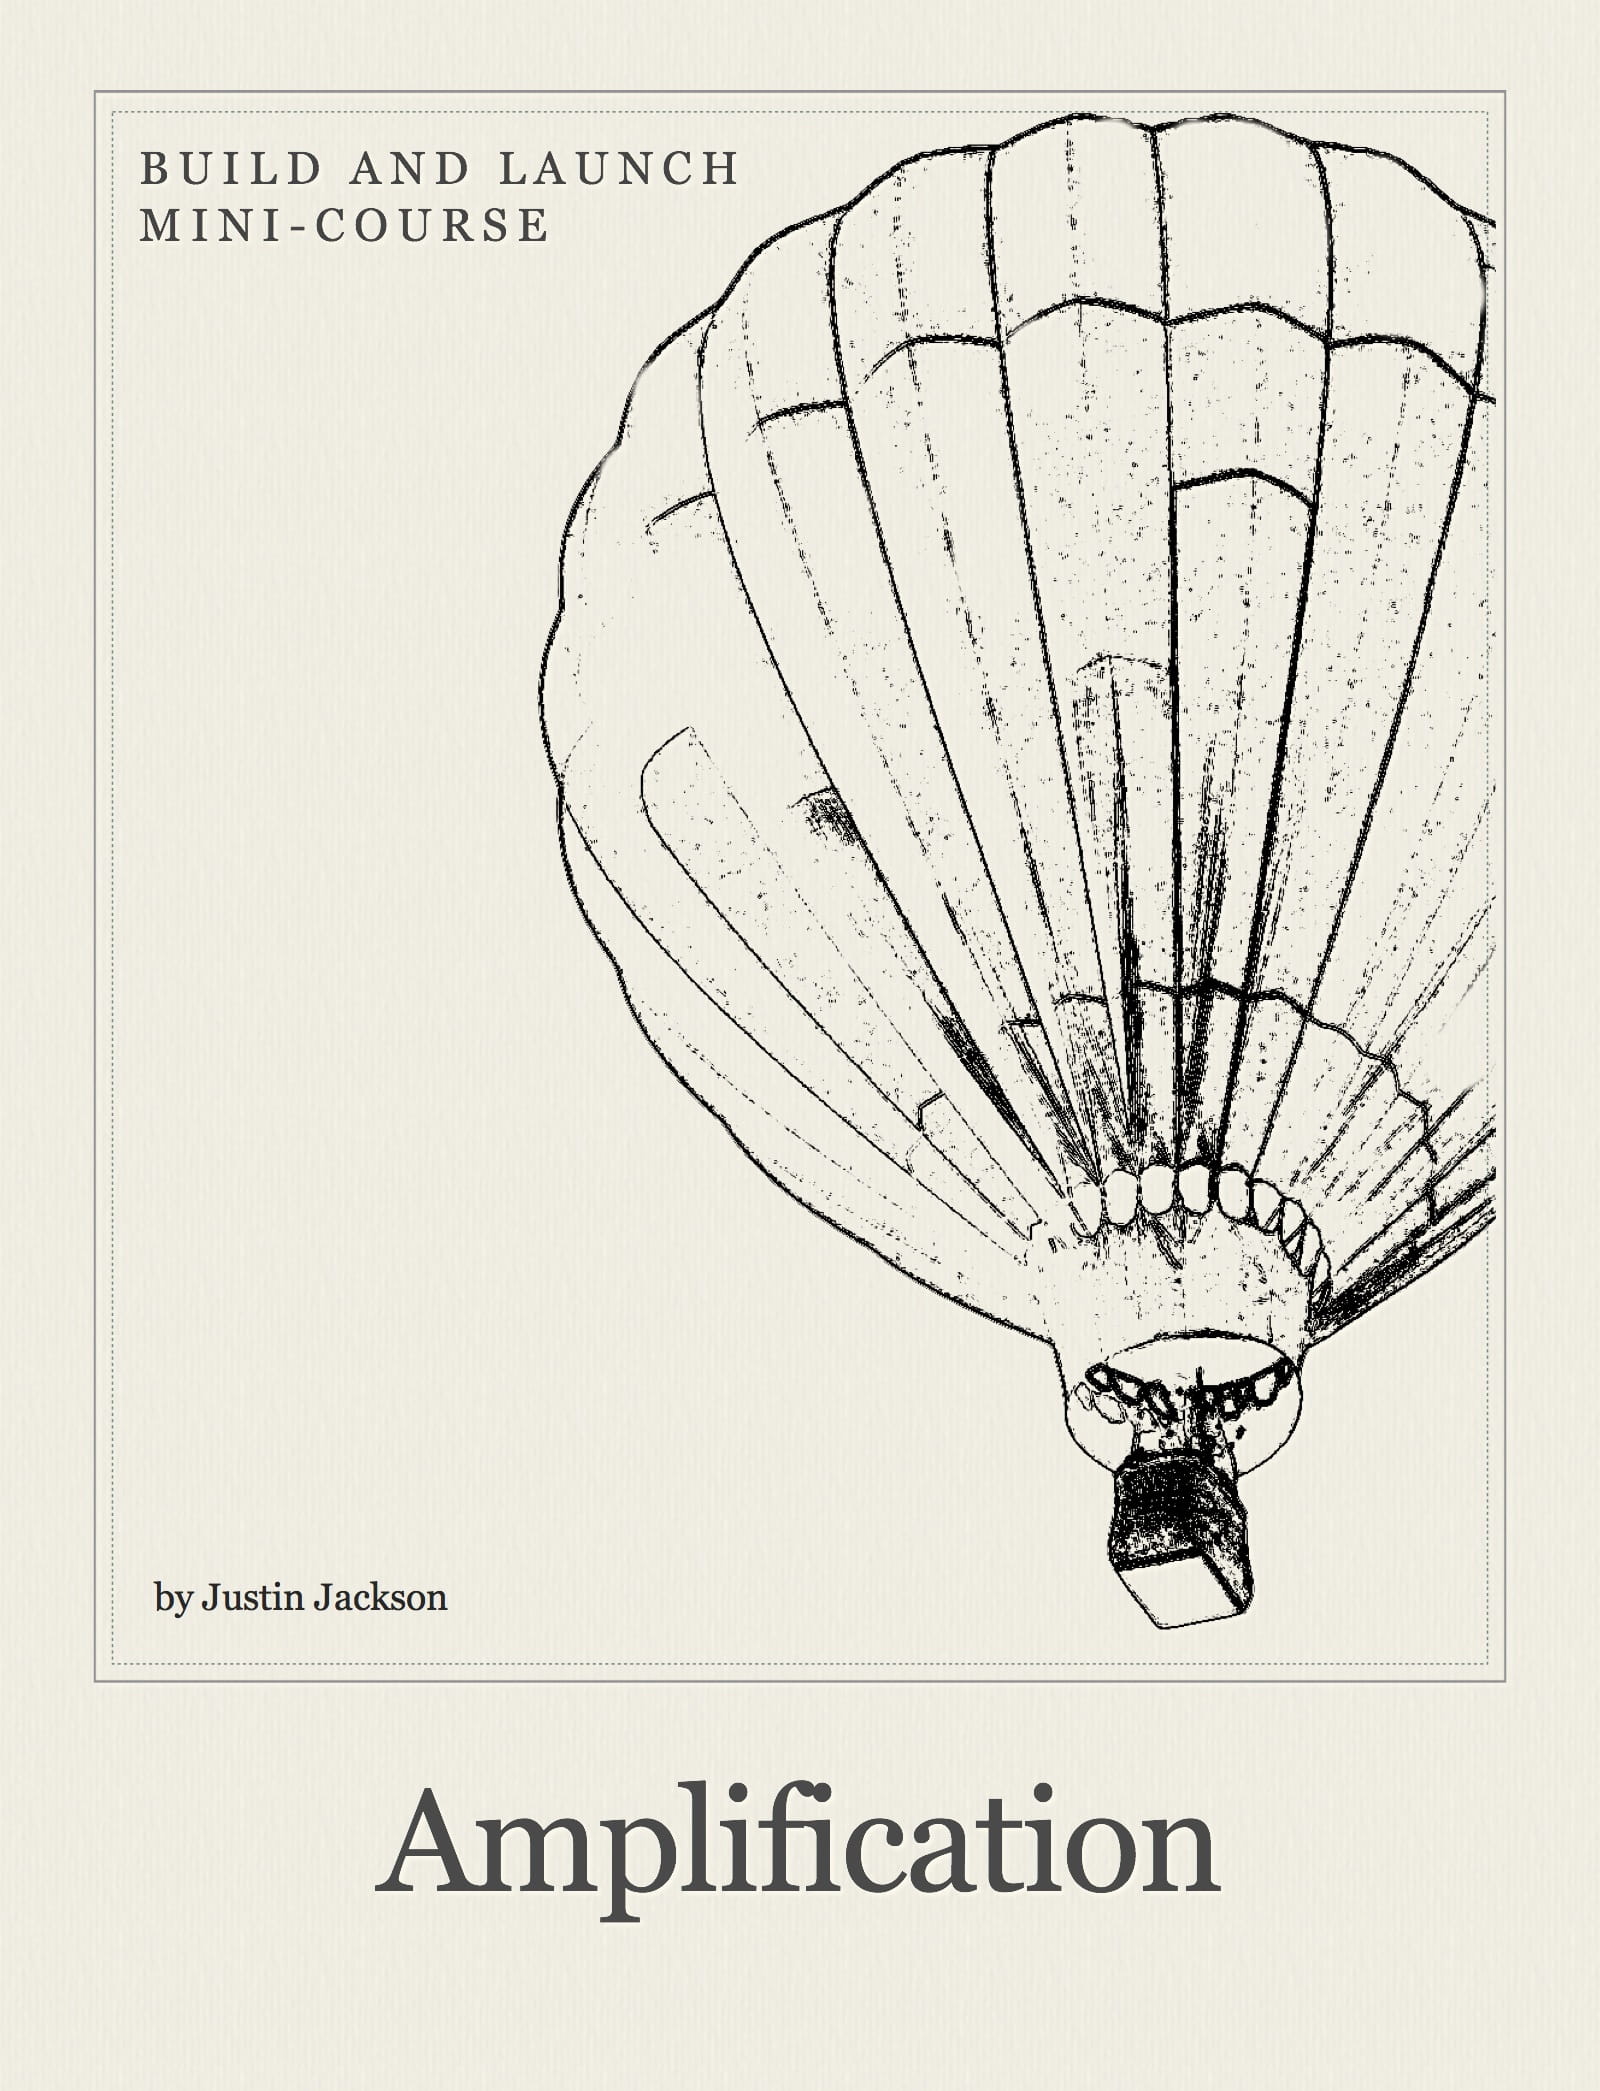 Amplification course cover by Justin Jackson